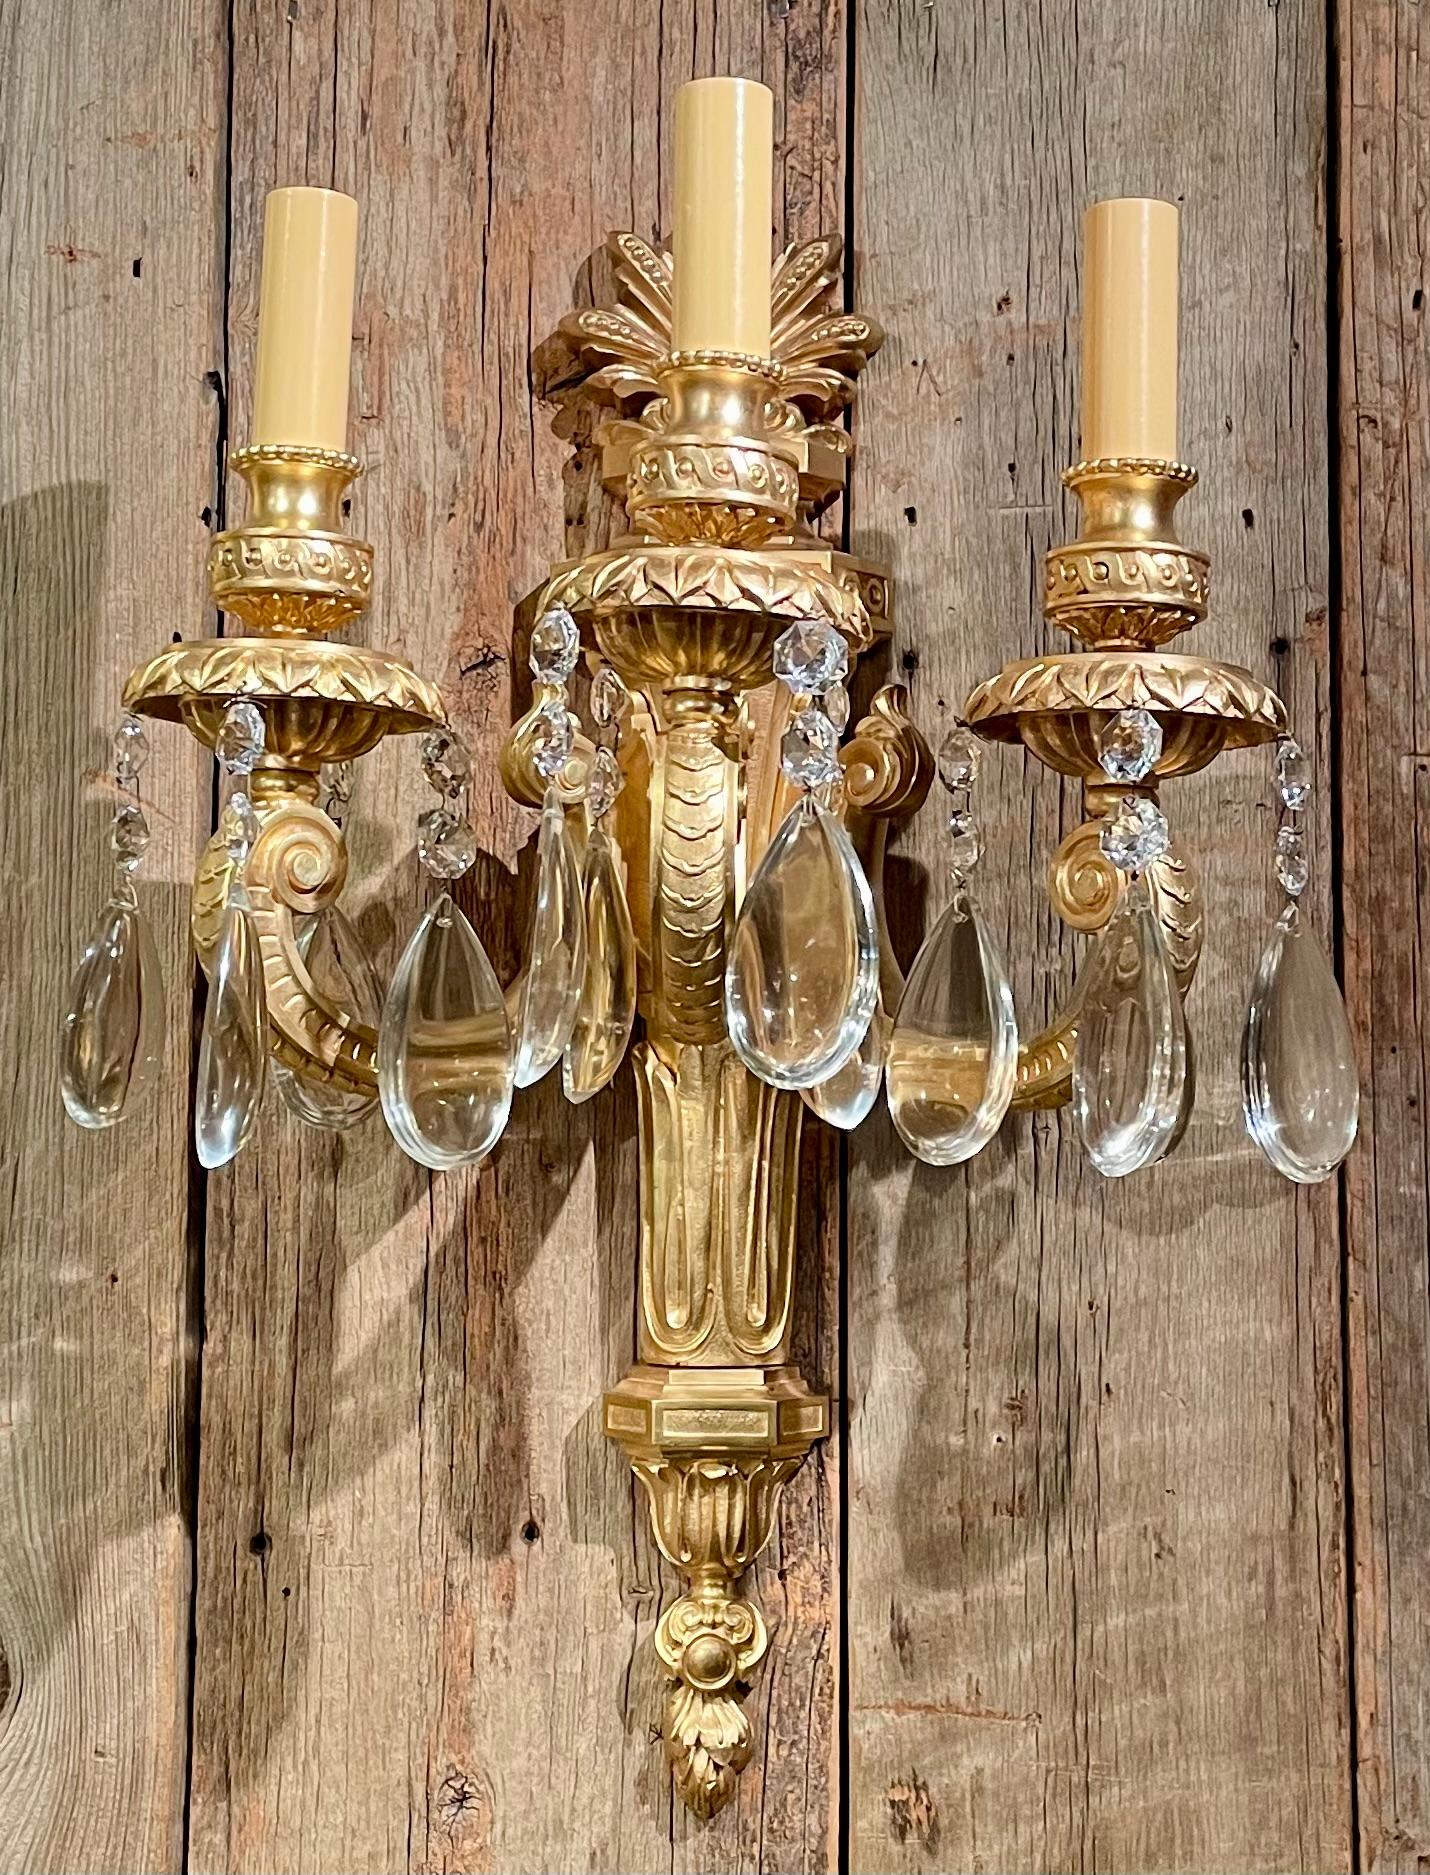 Magnificent Pair of Antique French Regency Ormolu Chateau Lights / Sconces, Circa 1840-1850.